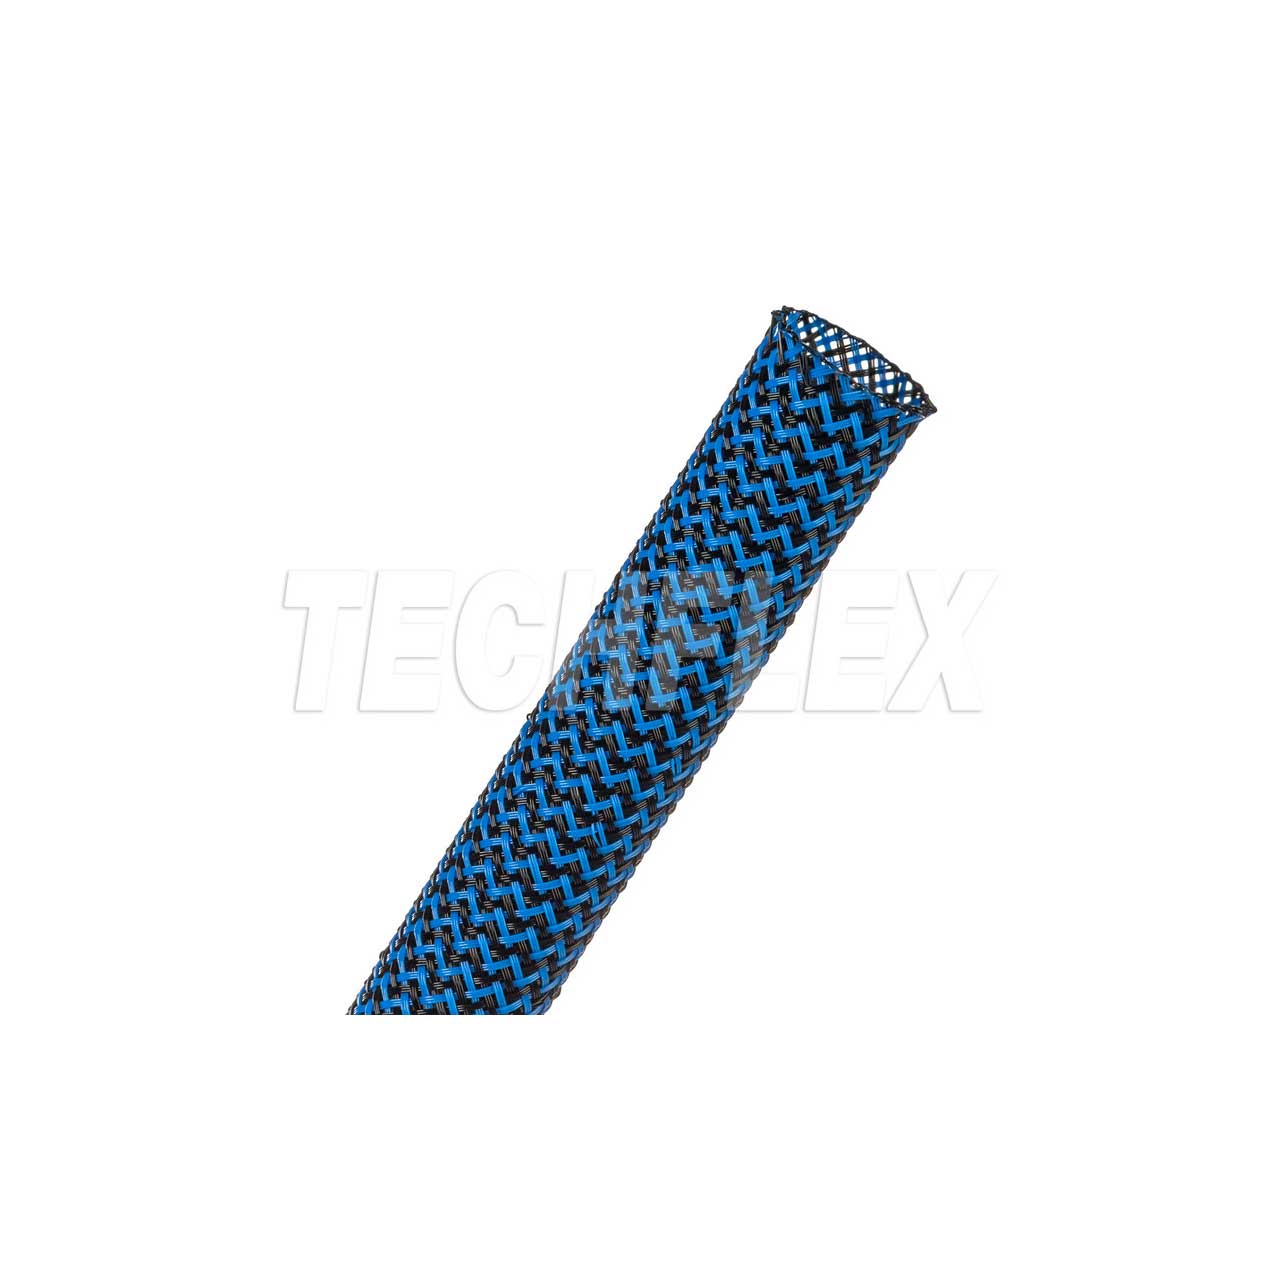 Techflex PTT0.75BNB Tight Weave 3/4 Inch Expandable Cable Tubing - Black with Neon Blue Tracer - 75 Foot  PTT0.75BNB 75